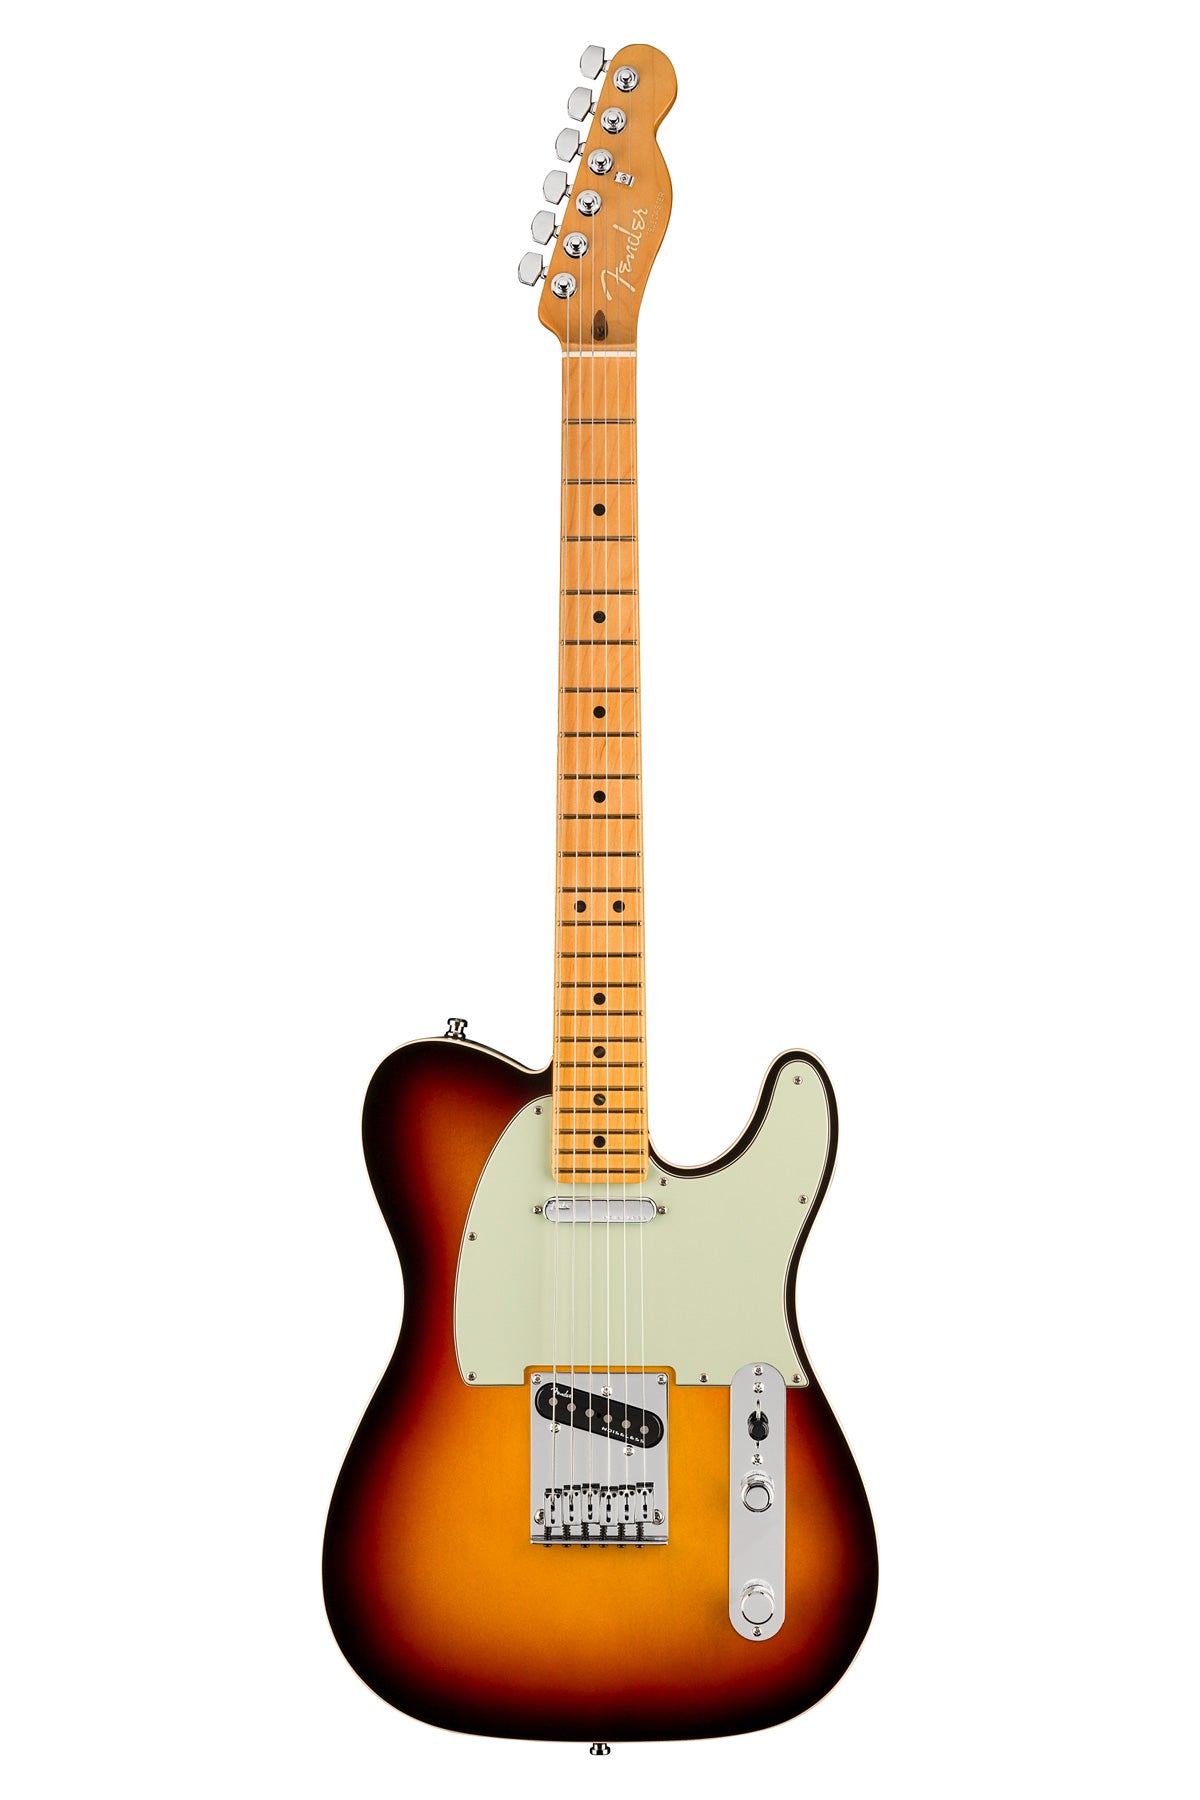 Fender American Ultra Telecaster Electric Guitar with Maple Fingerboard - Ultraburst